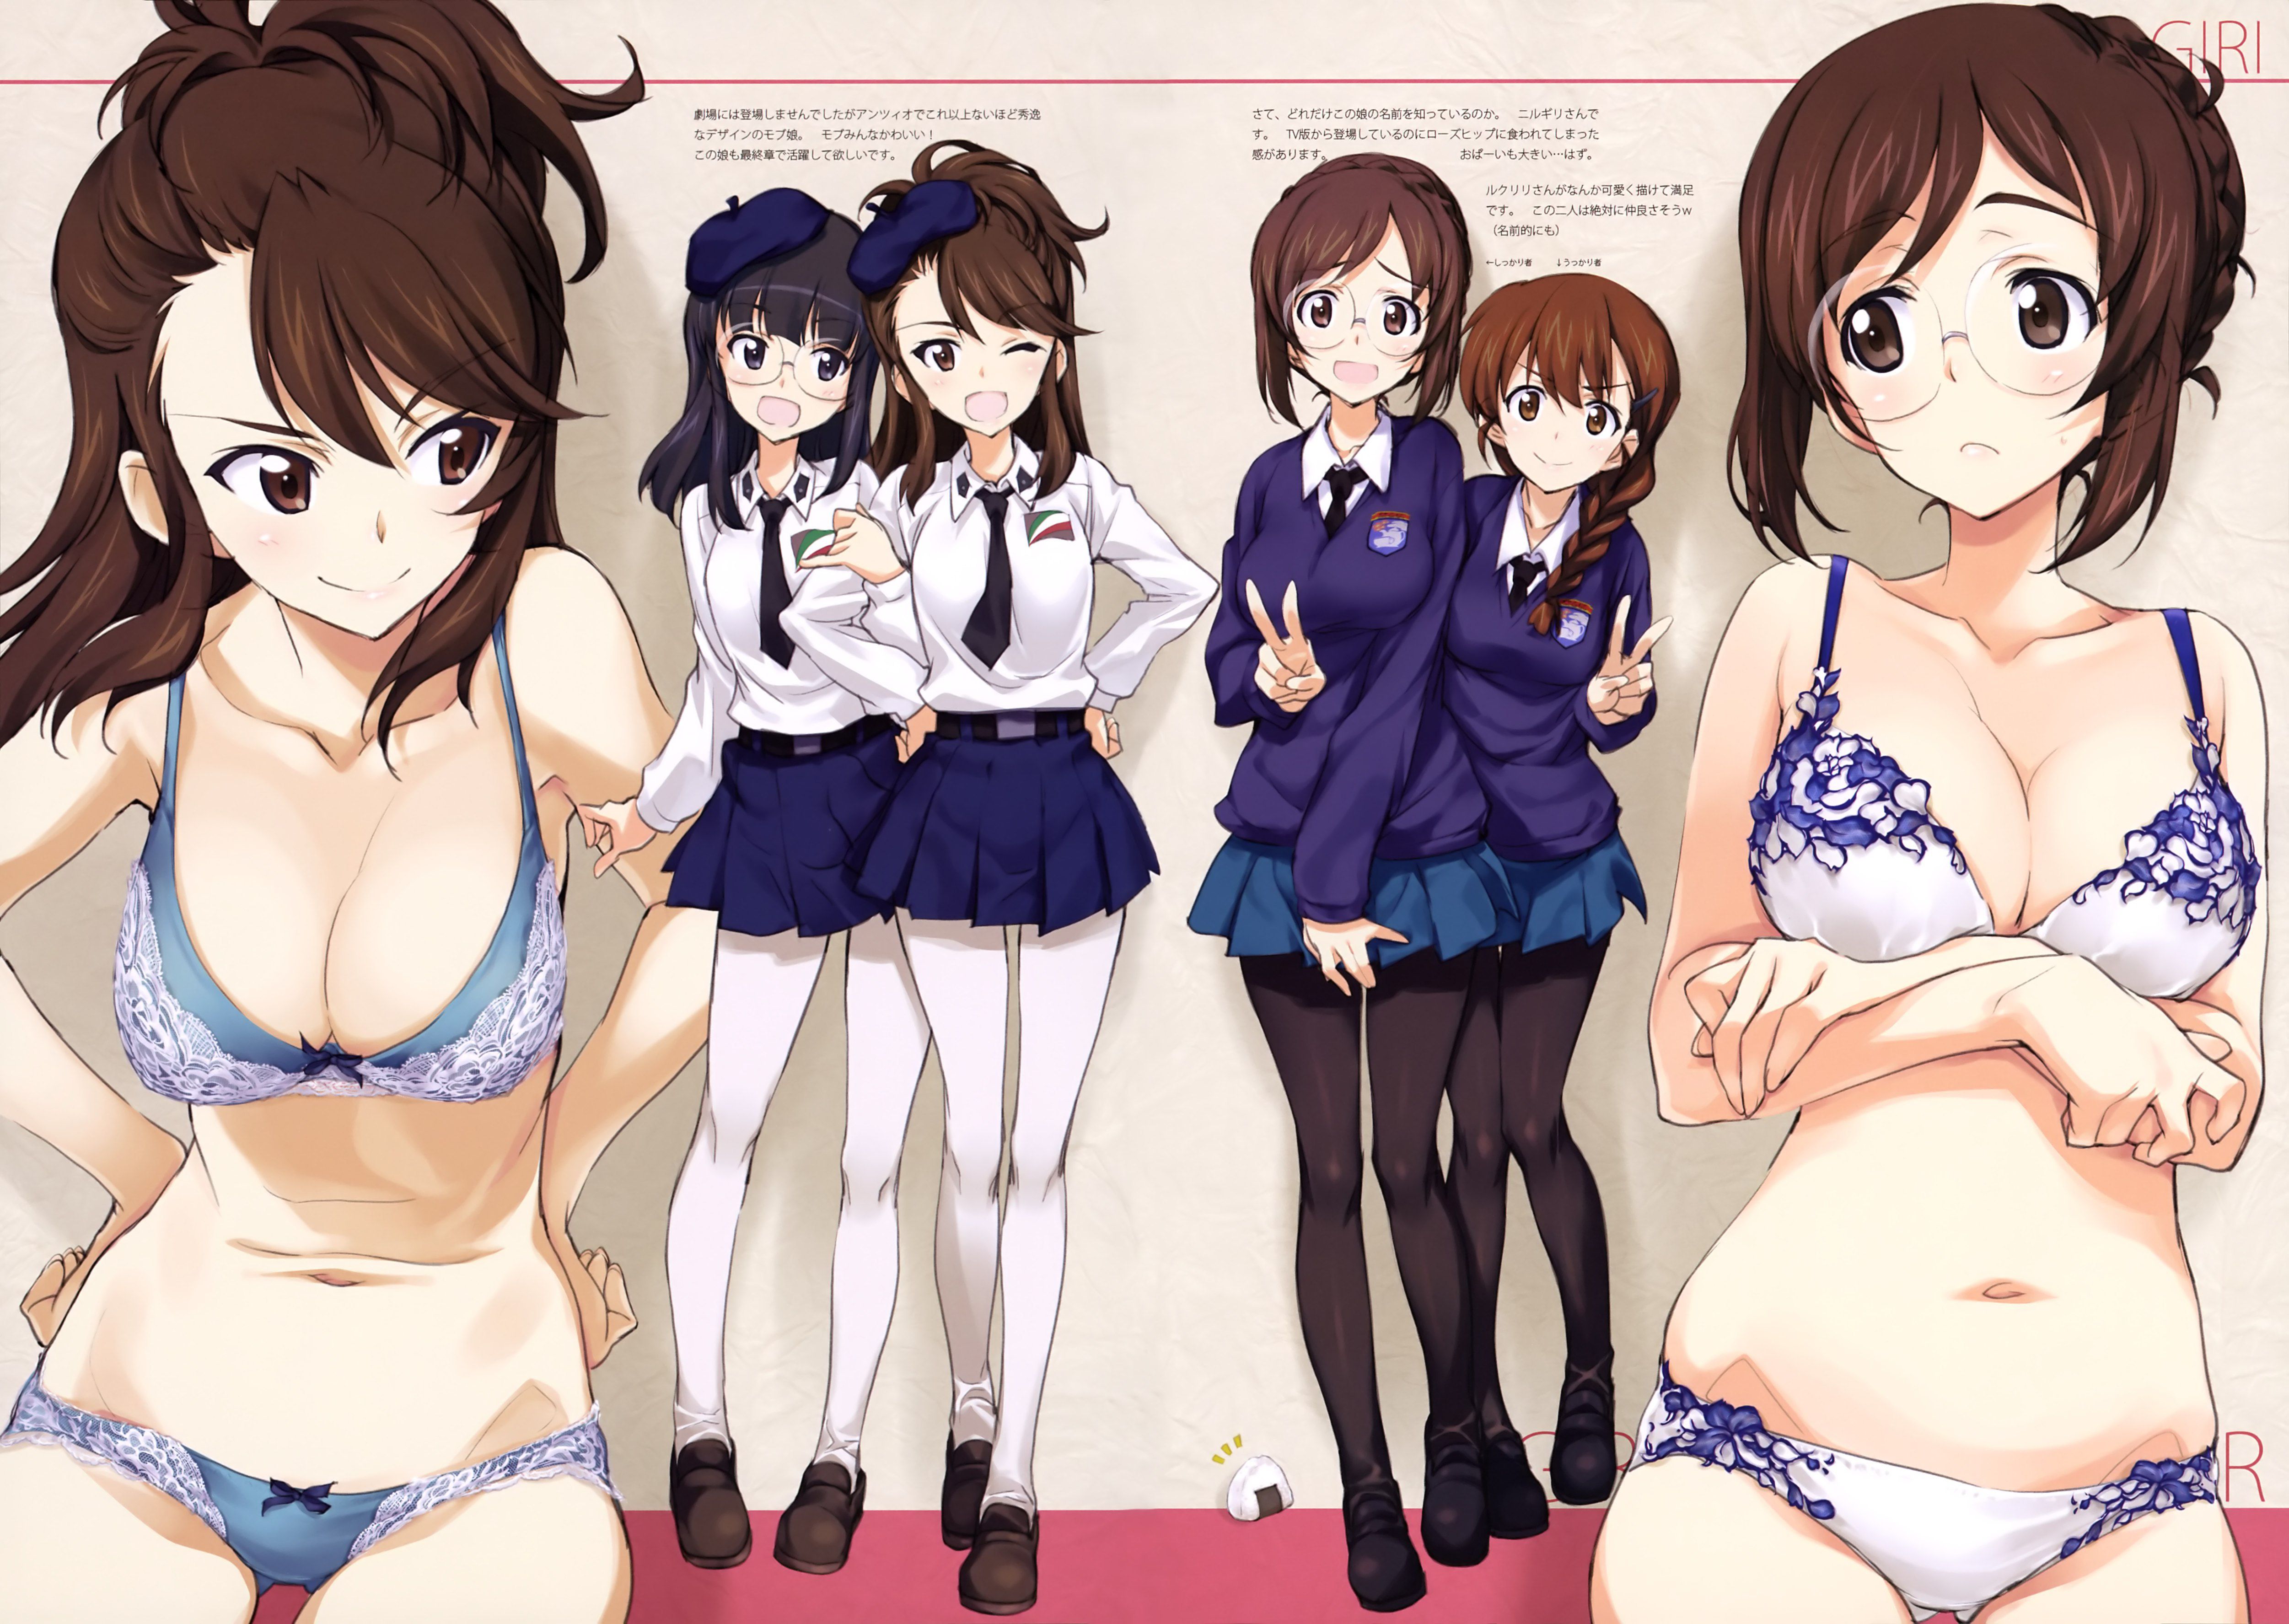 Is this heaven even though it is too much of the uniform of the girl junior high school student and the high school girl? 2D erotic image called 50